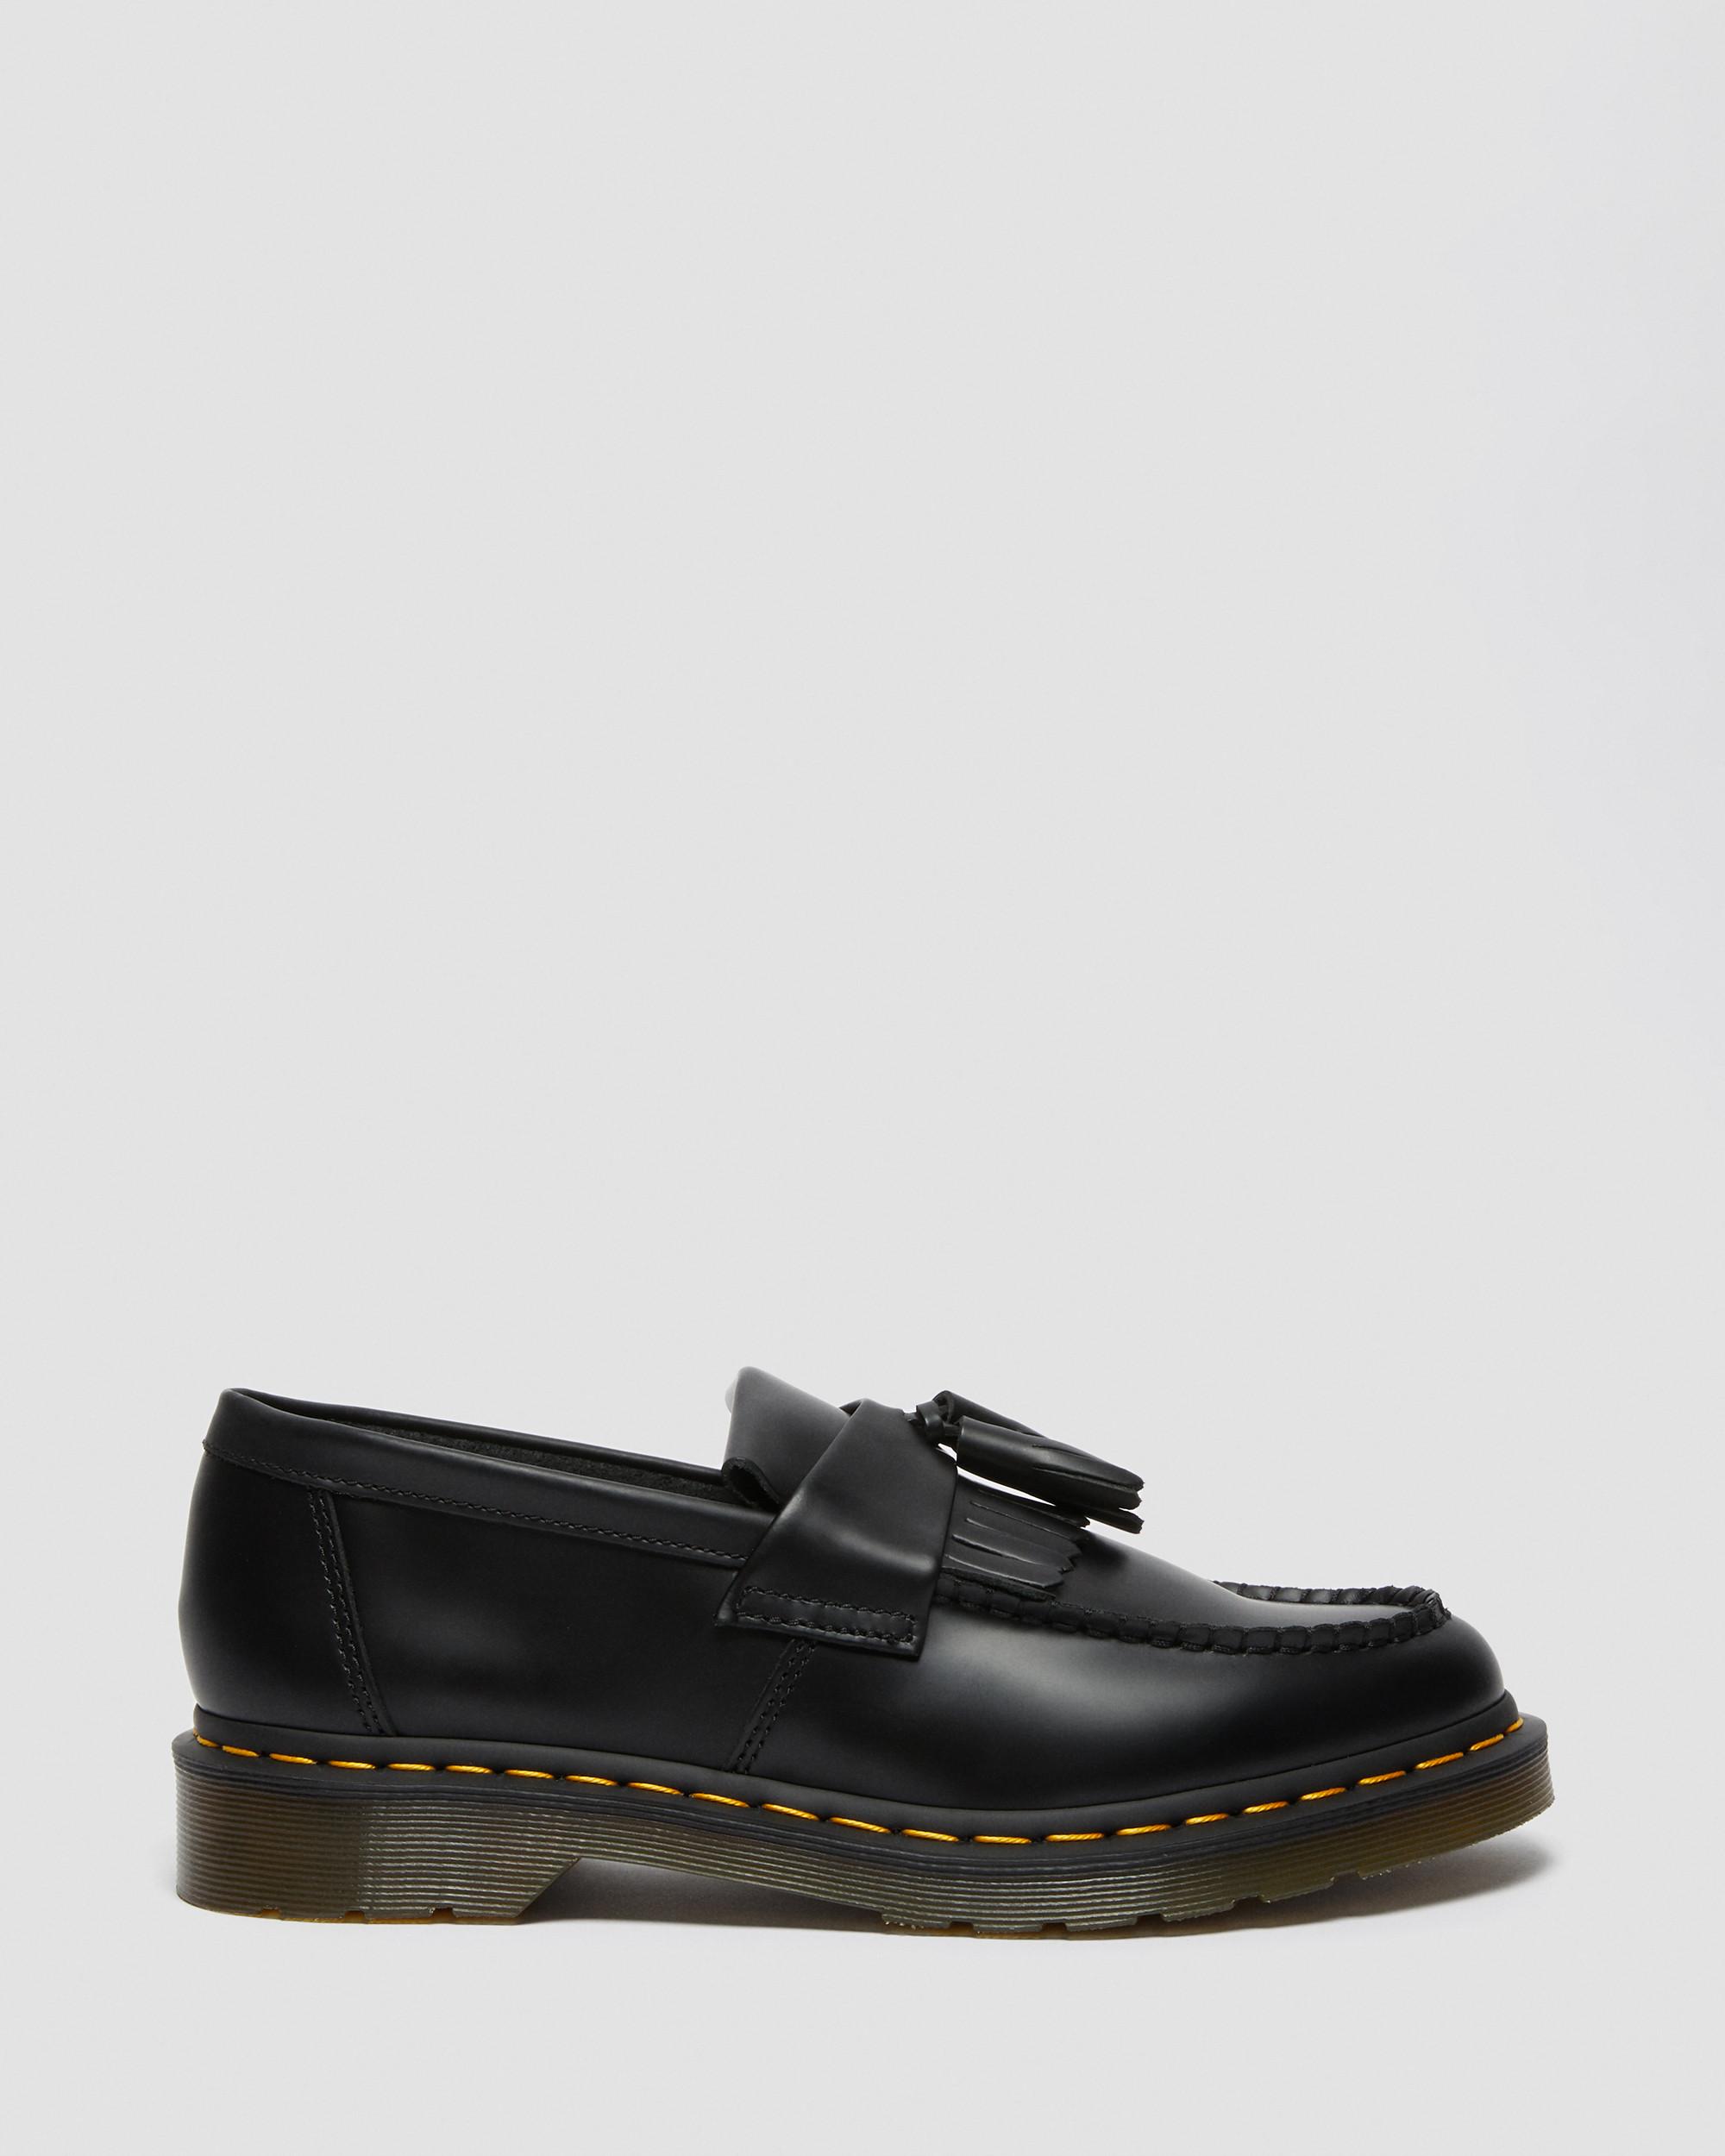 Adrian Yellow Stitch Leather Tassel Loafers in Black | Dr. Martens